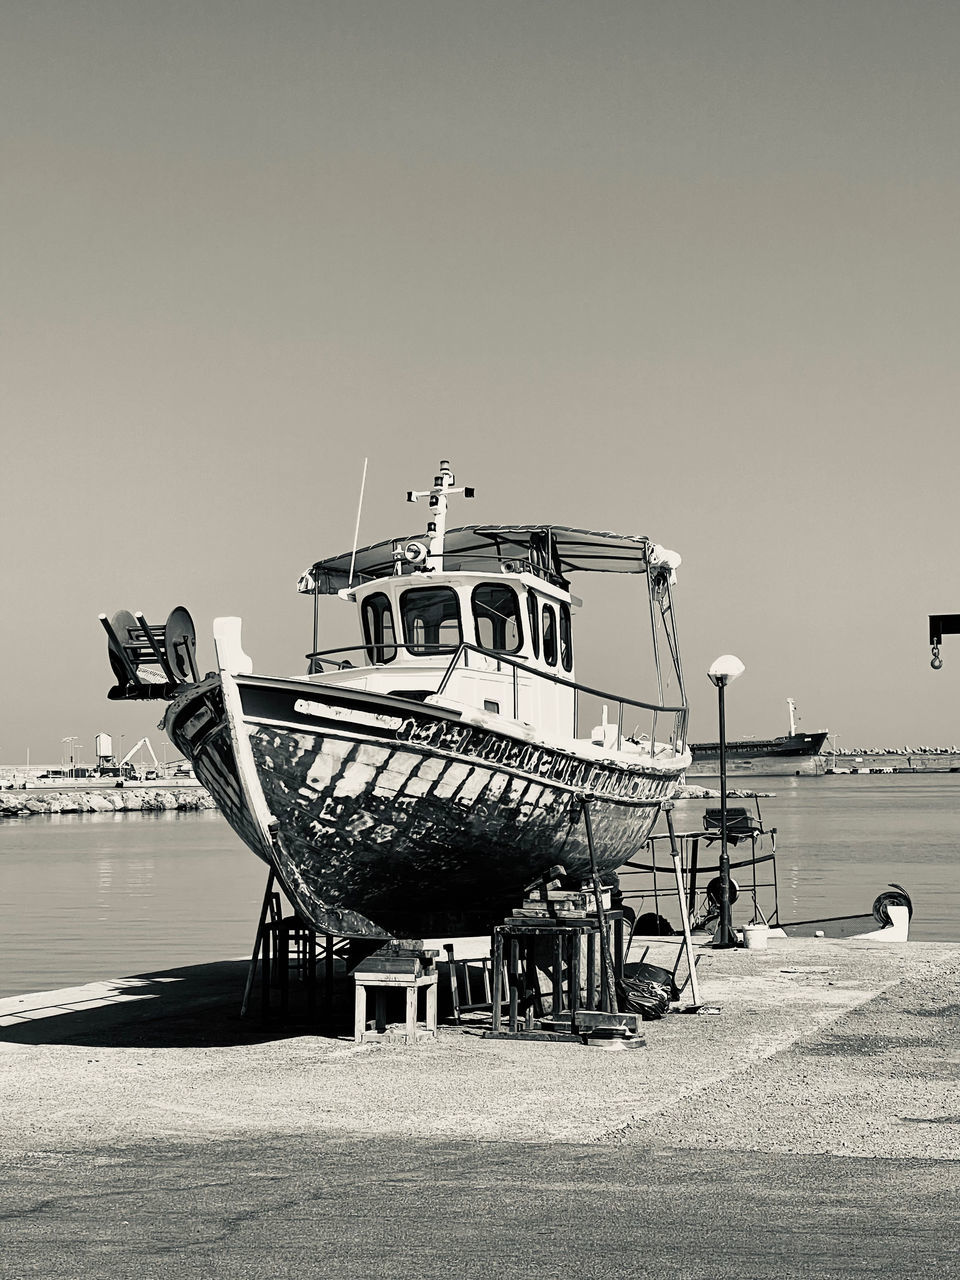 transportation, water, vehicle, mode of transportation, sea, nature, nautical vessel, sky, aviation, aircraft, boat, monochrome, beach, airplane, black and white, no people, monochrome photography, day, copy space, clear sky, land, watercraft, sunny, ship, outdoors, coast, travel, sunlight